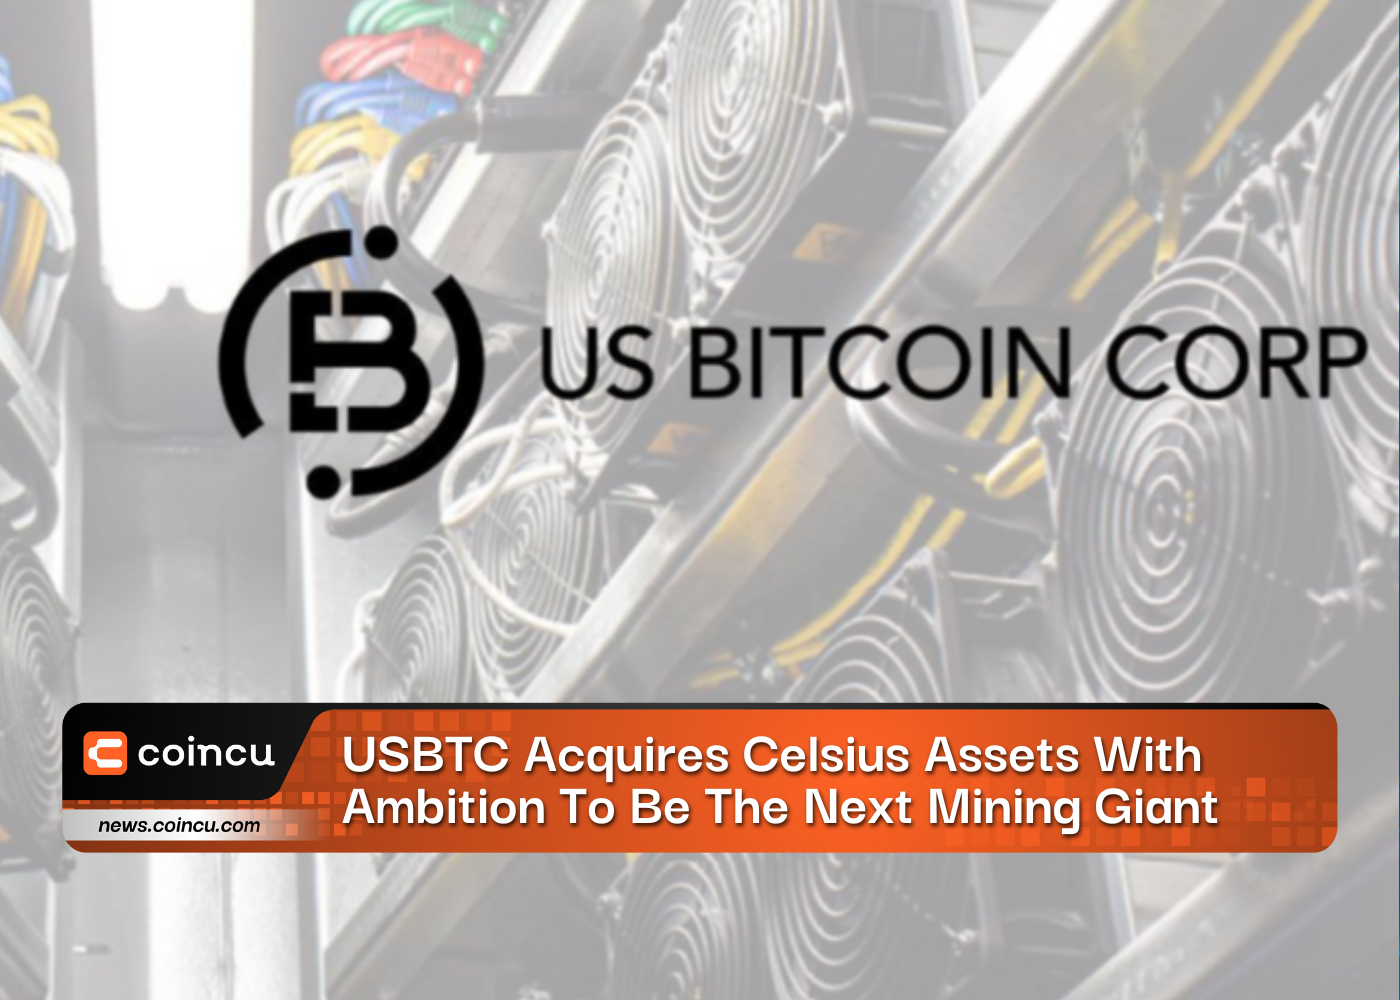 USBTC Acquires Celsius Assets With Ambition To Be The Next Mining Giant